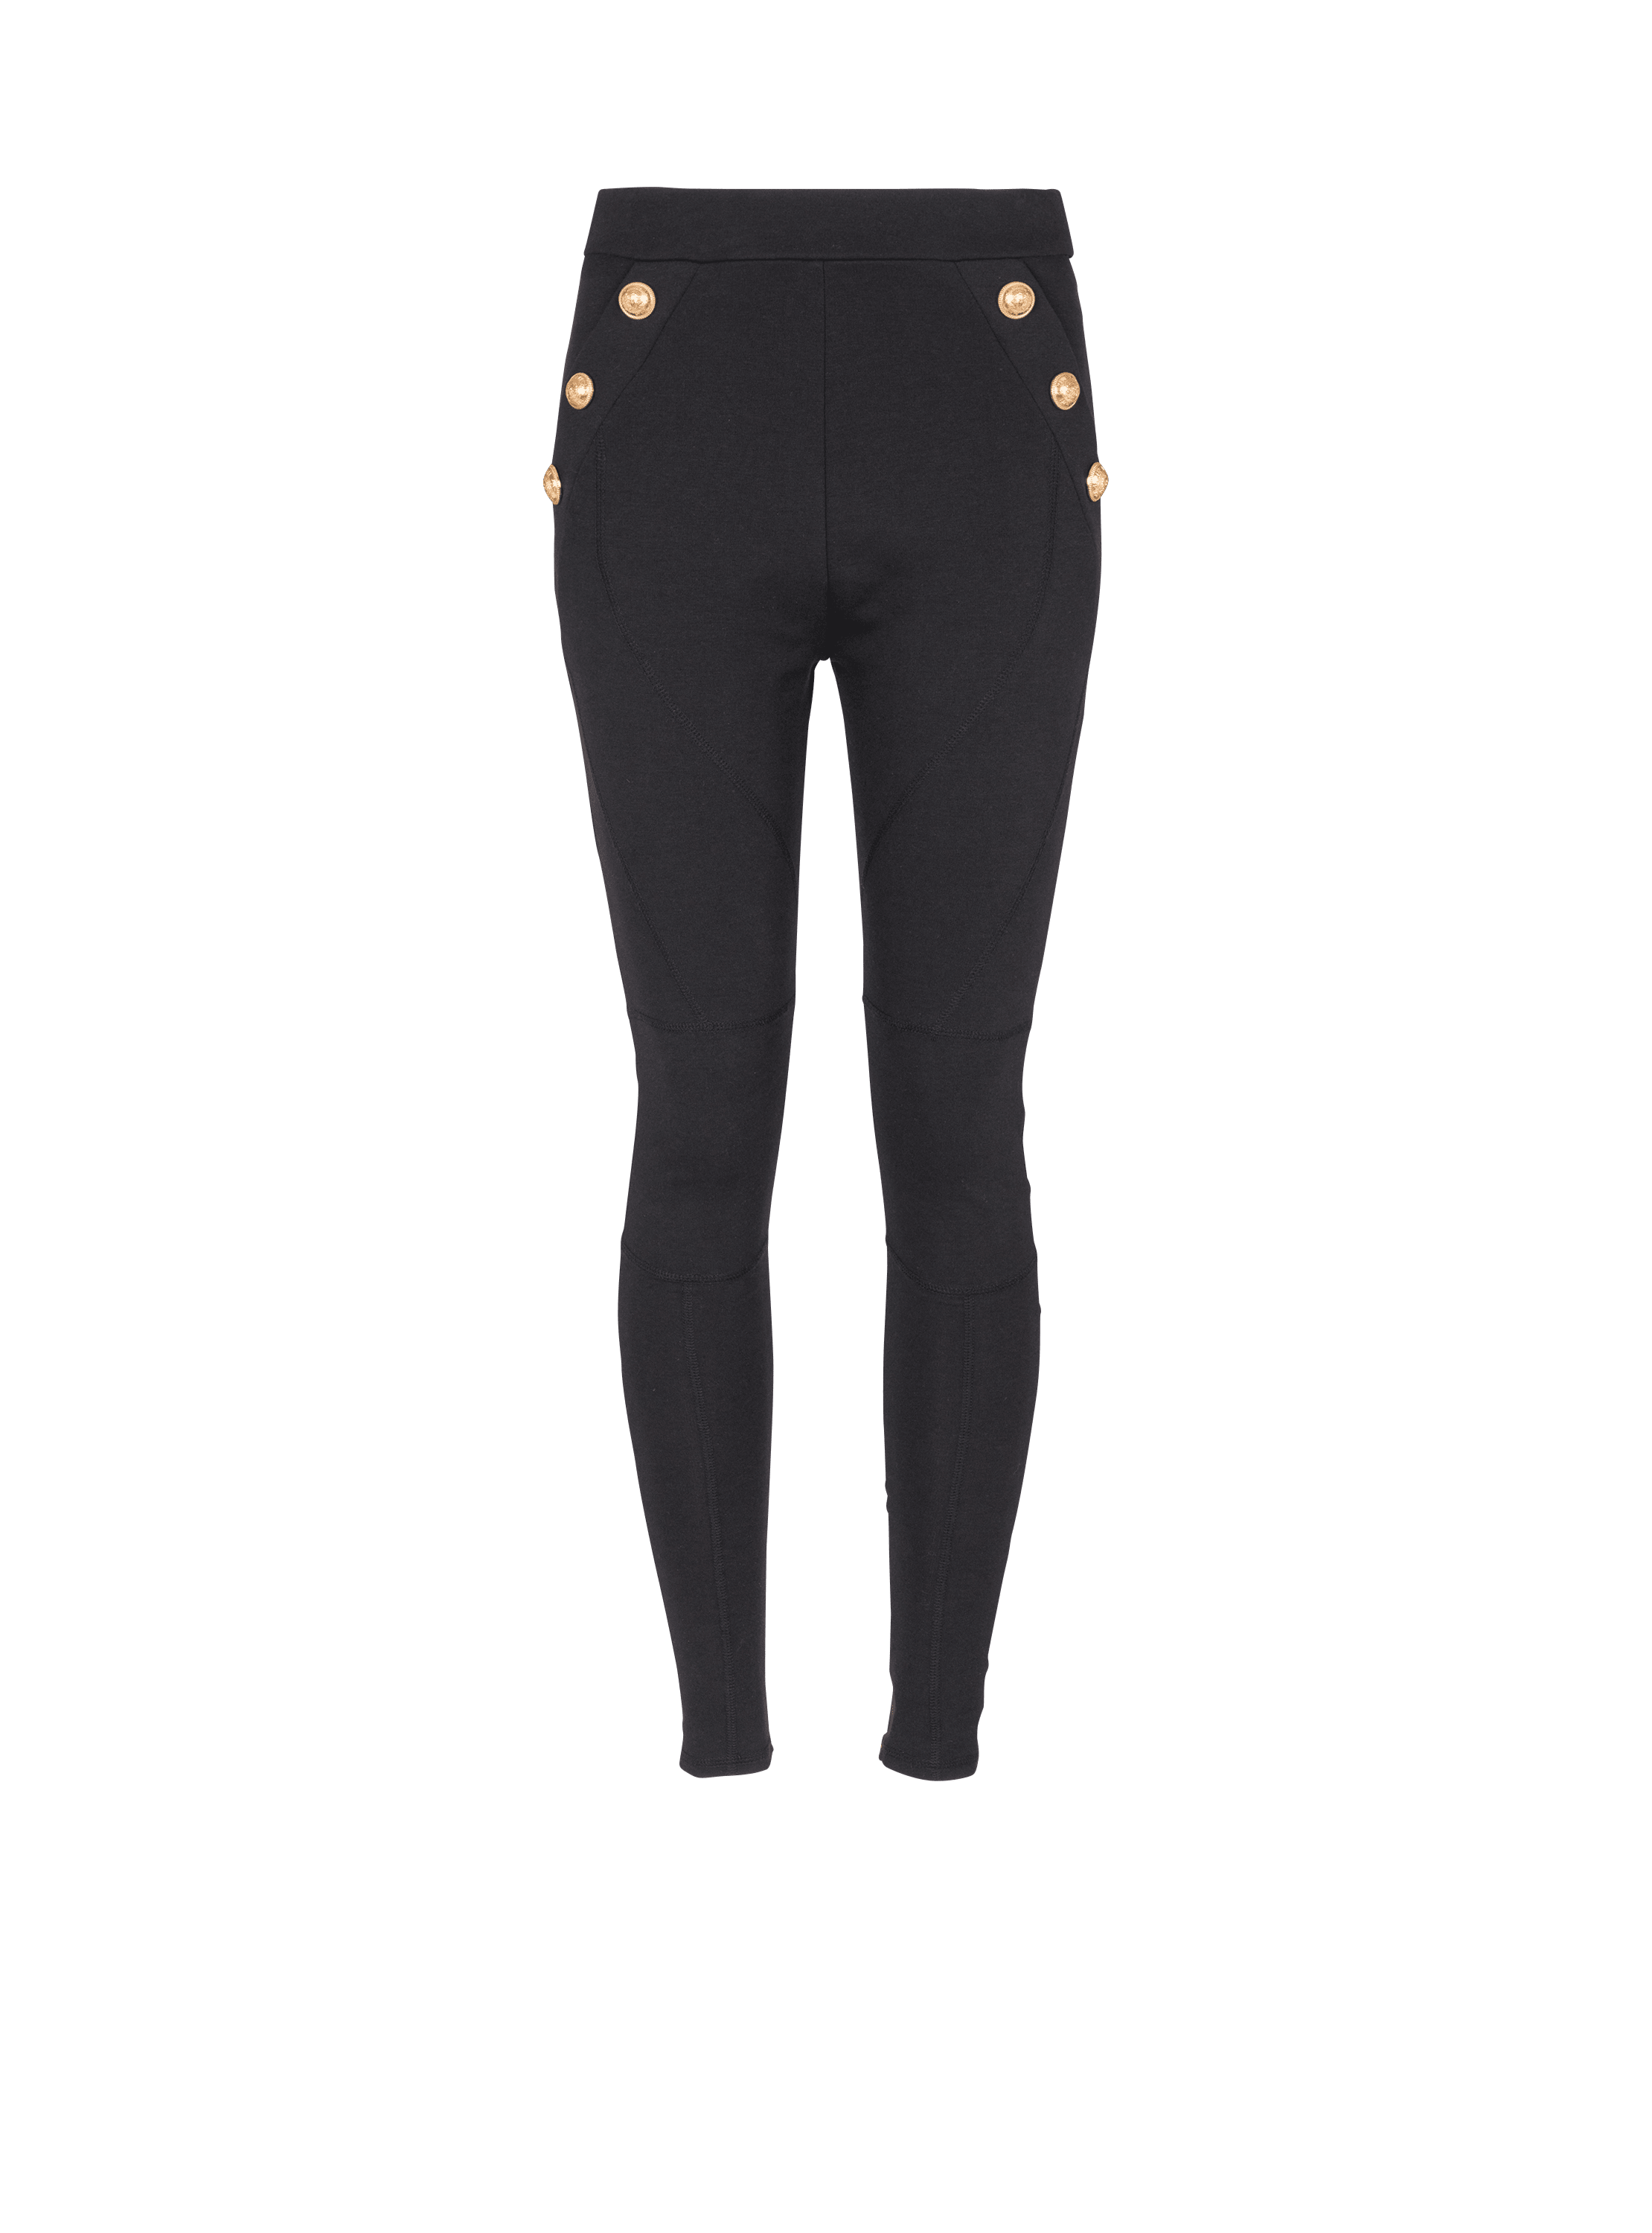 Knit leggings with 6 buttons - Women